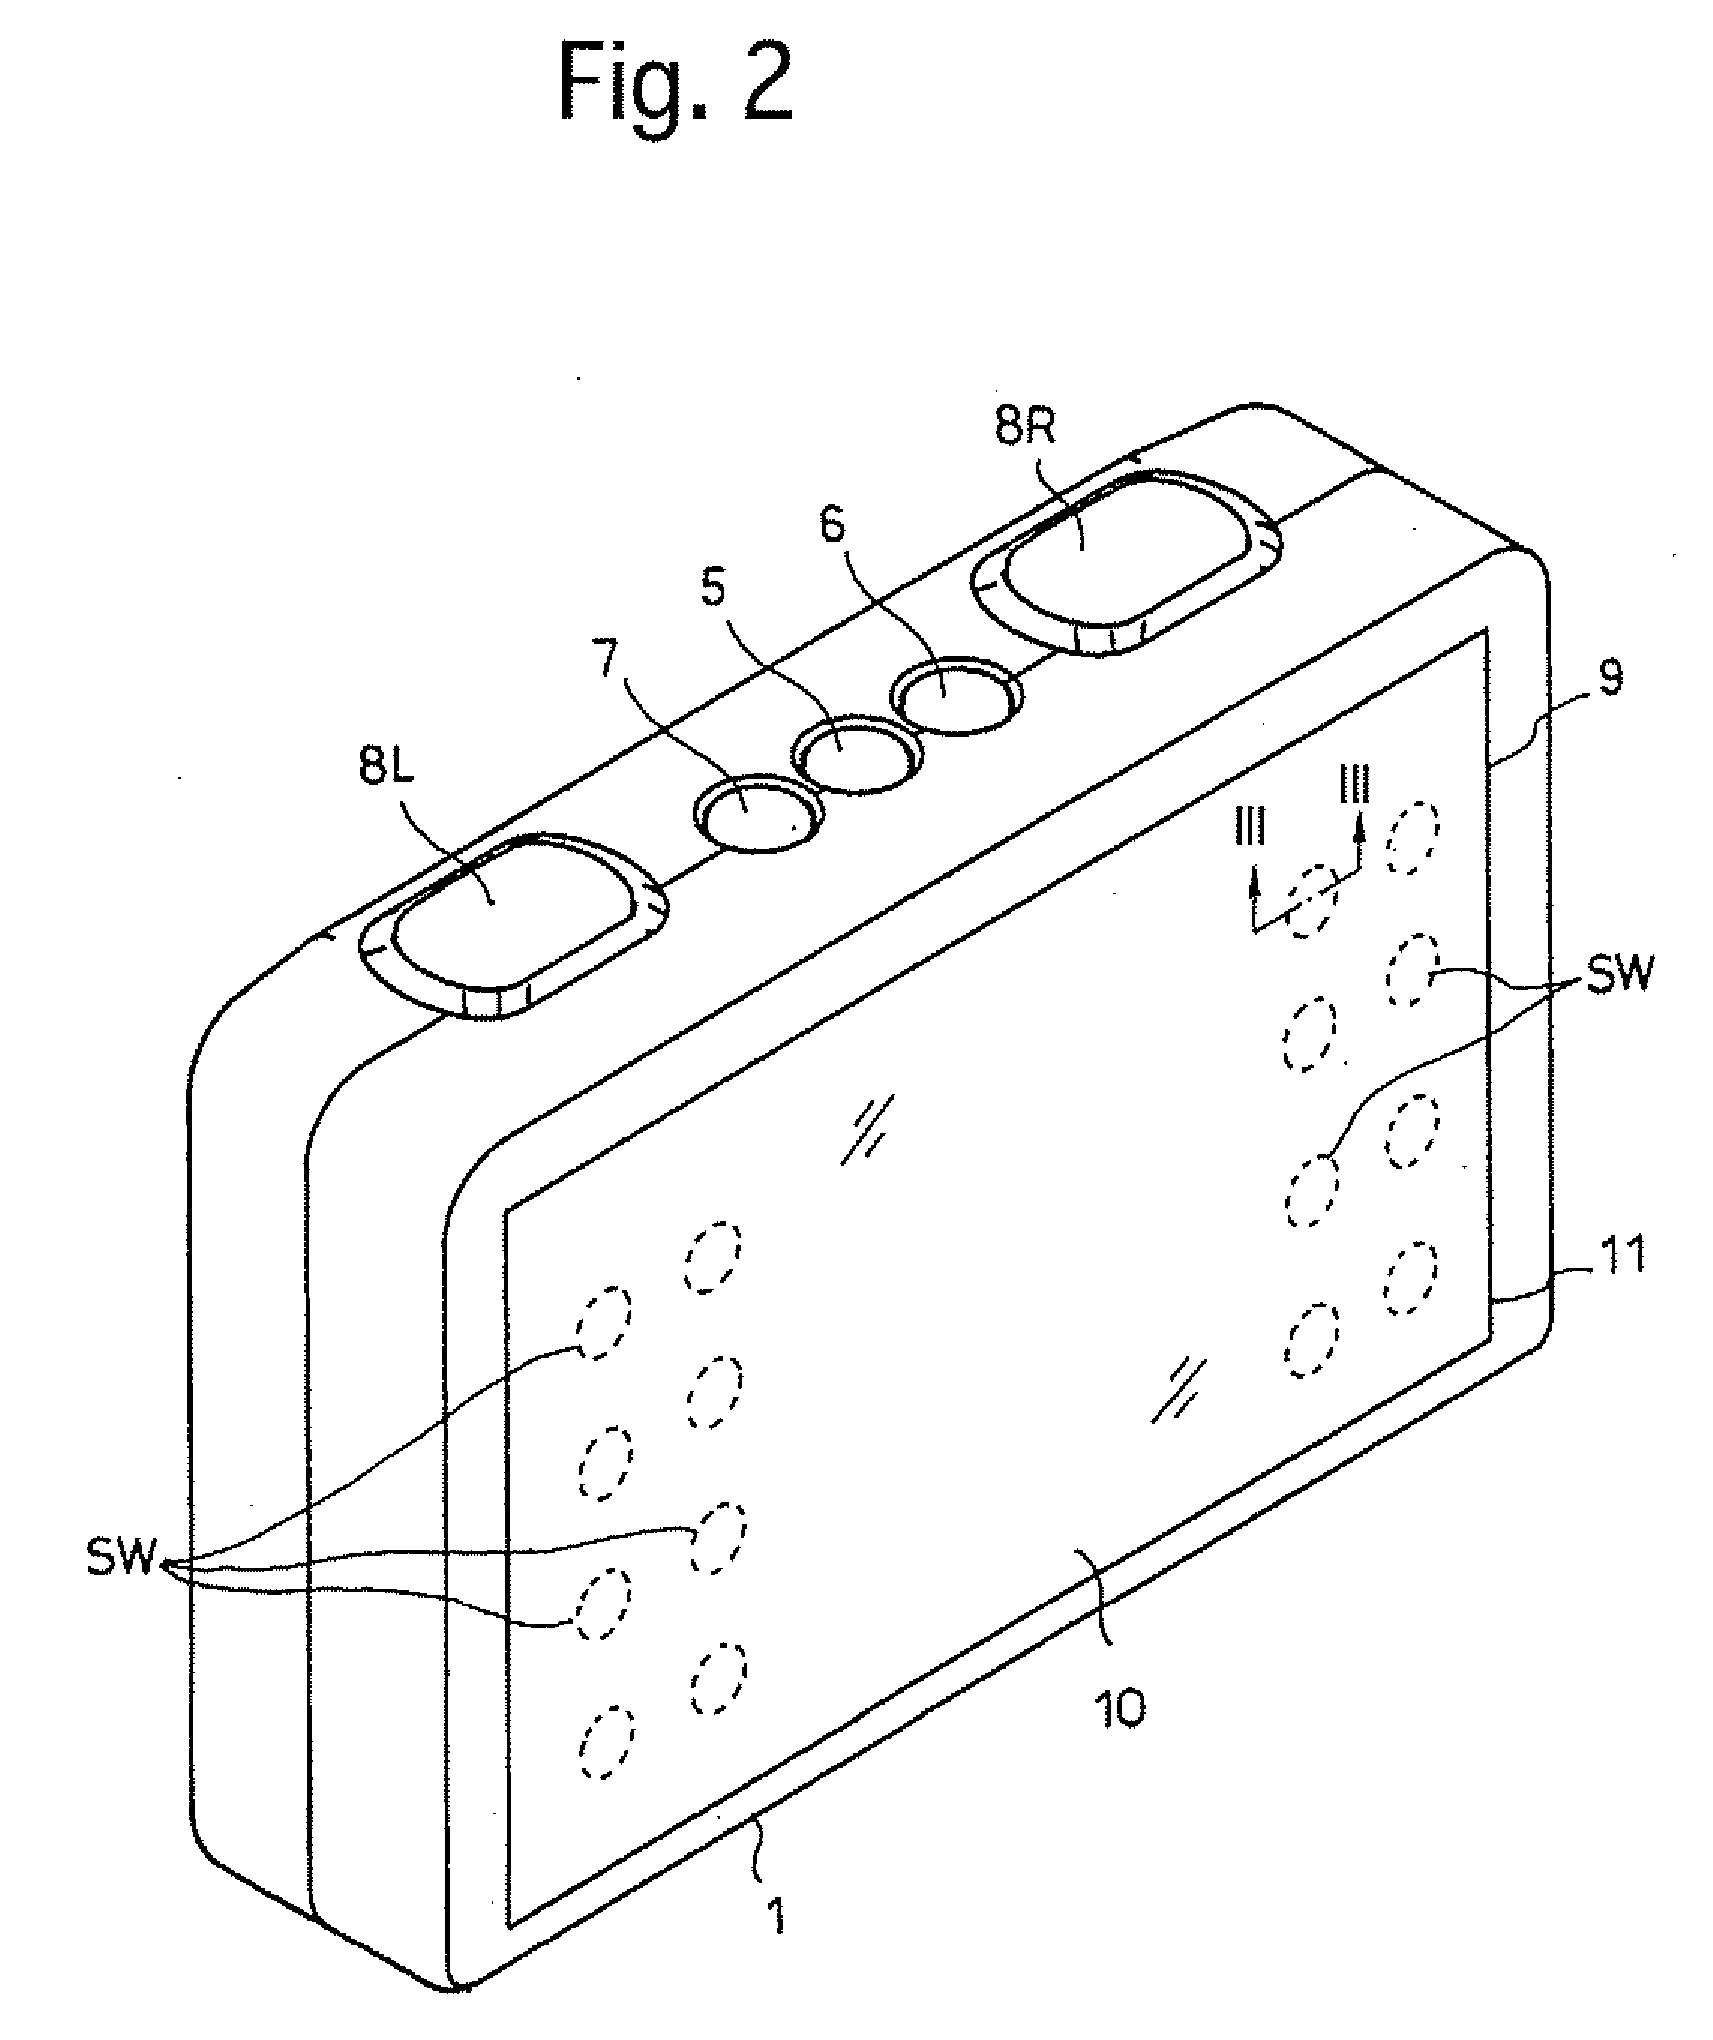 Electroluminescent display device and a digital camera using an electroluminescent display device